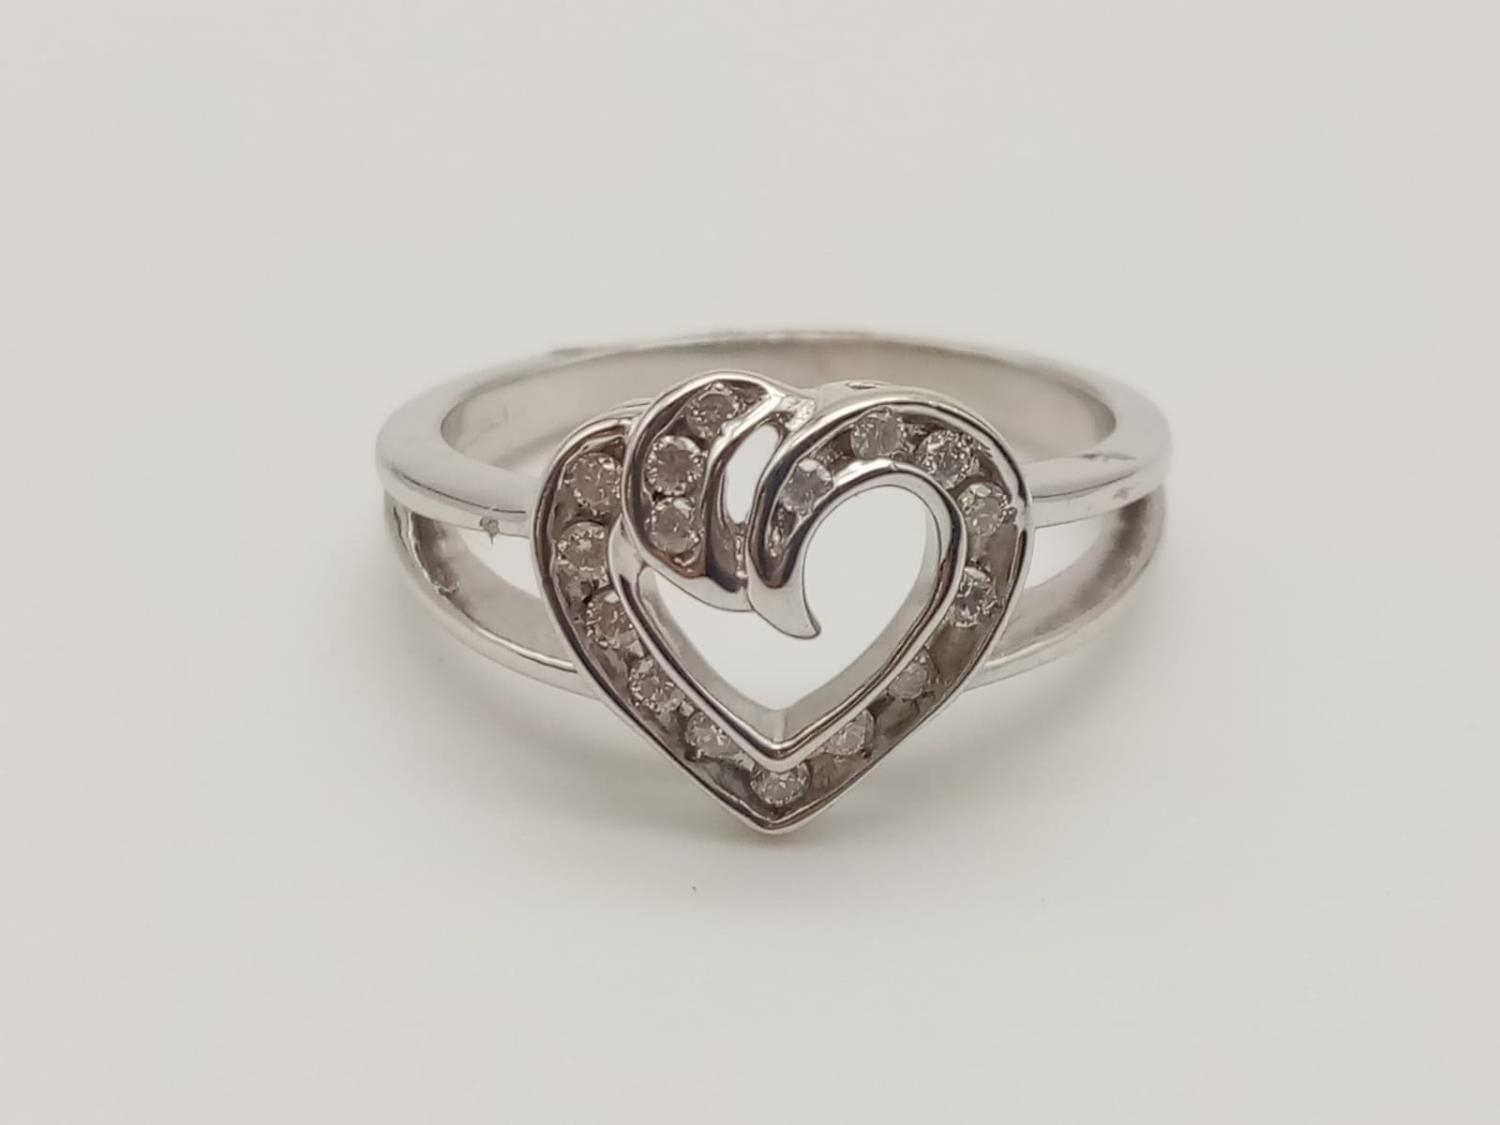 9k White gold DIAMOND SET HEART RING, weight 3.7g and approx 0.25ct diamonds, size O